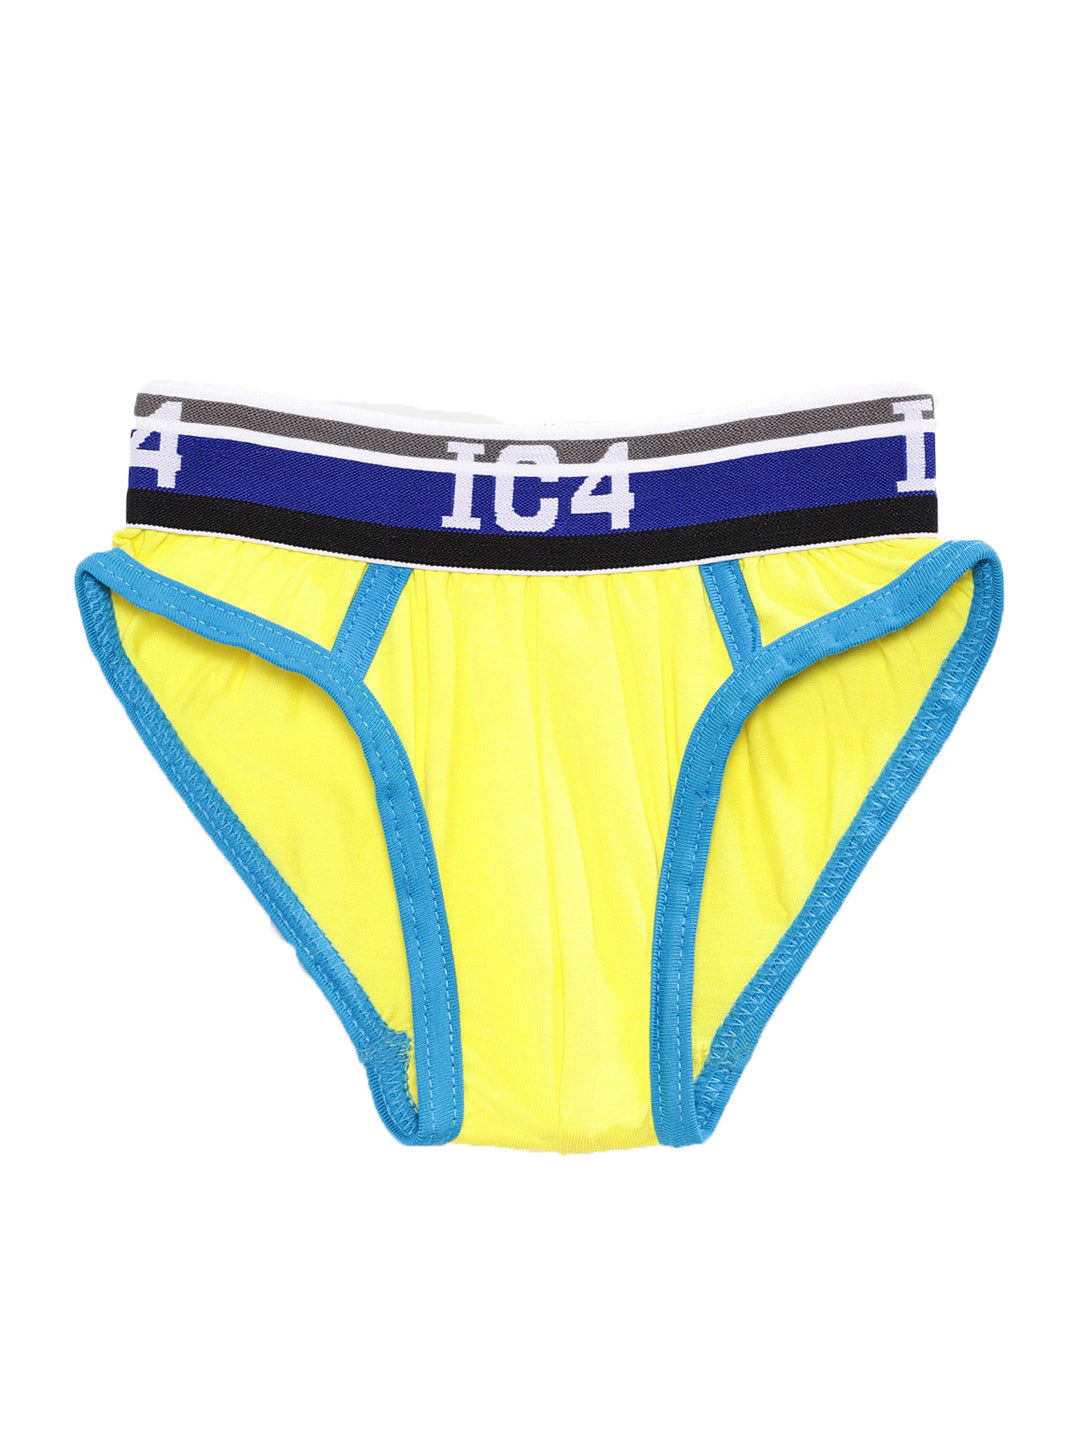 IC4 Boys Brief Yellow Combo Pack of 3